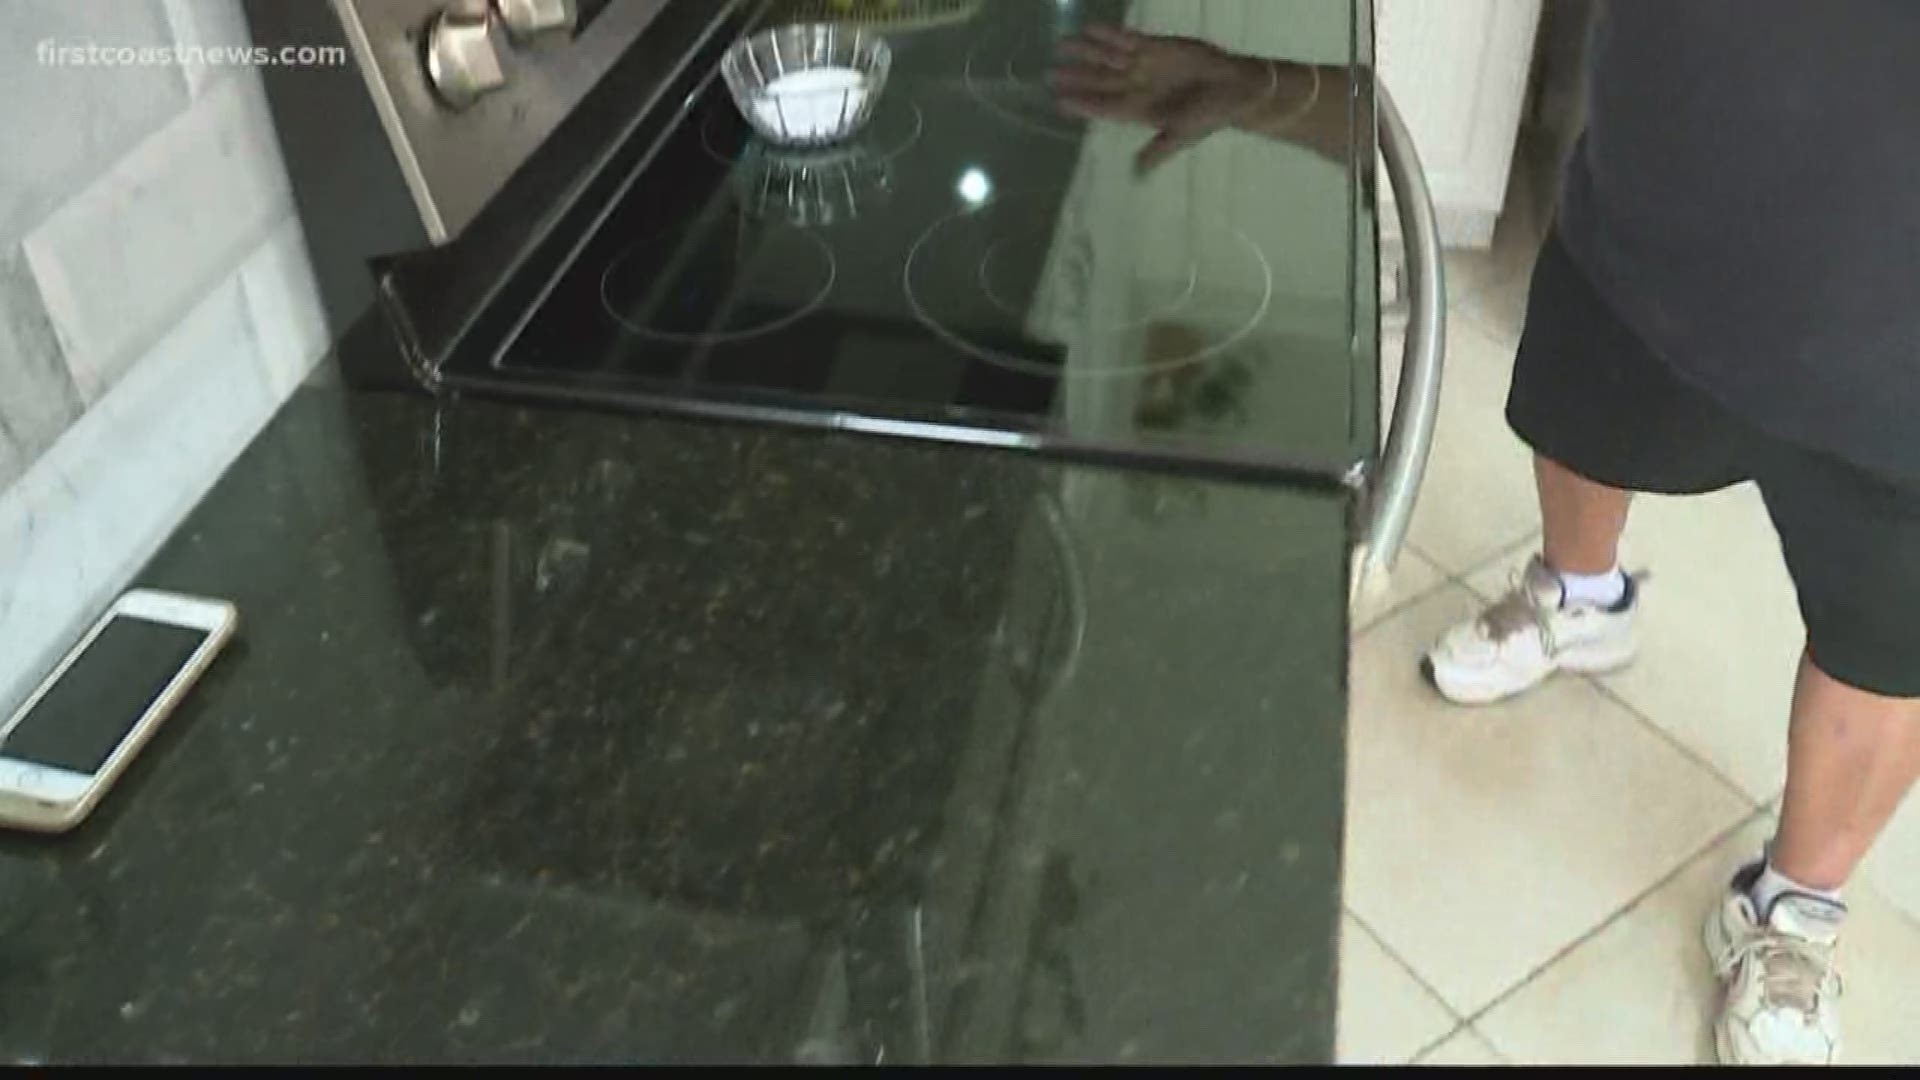 Months after a Jacksonville resident became frustrated with his granite countertop installation, the company who installed it, Art Stones Design, came through with their promise of customer satisfaction.